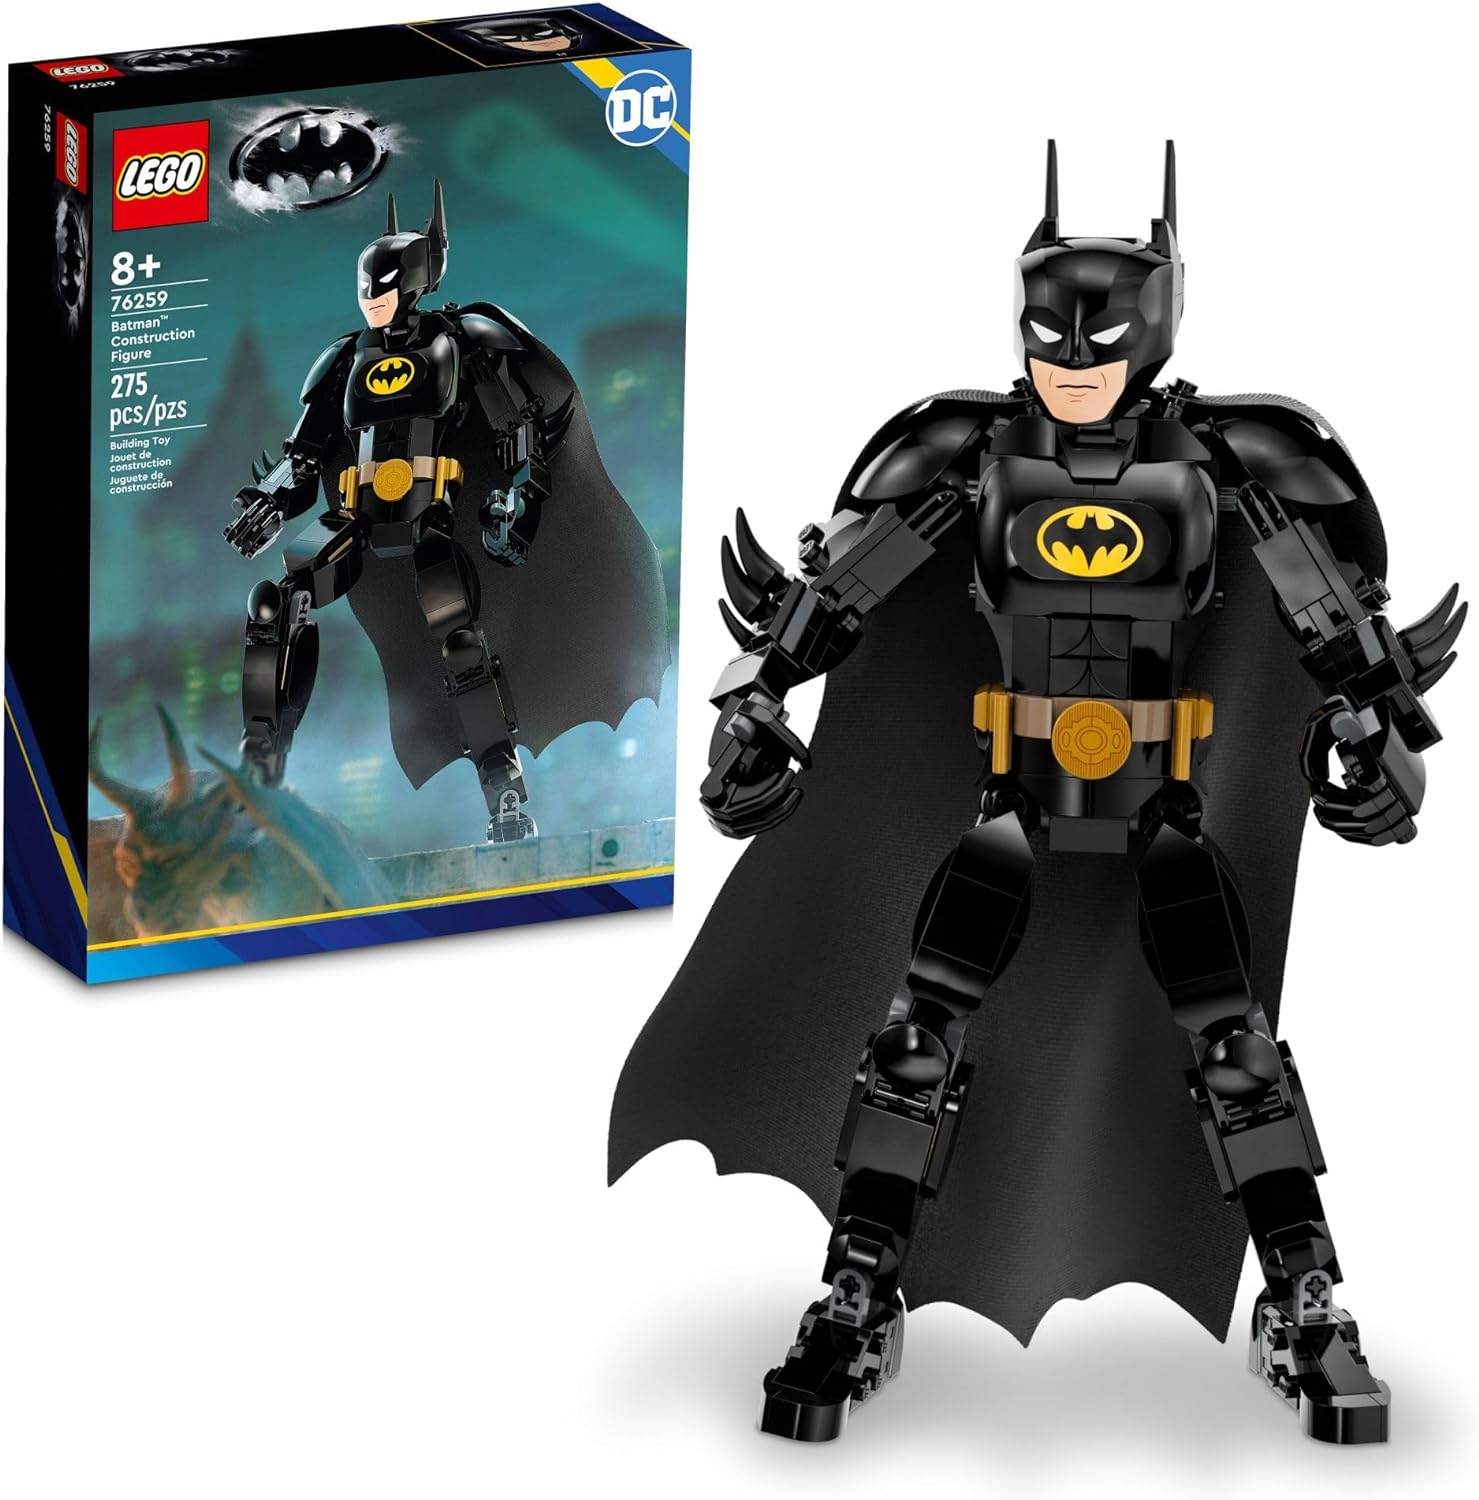 LEGO DC Batman Construction Figure 76259 Buildable DC Action Figure, Fully Jointed DC Toy for Play a